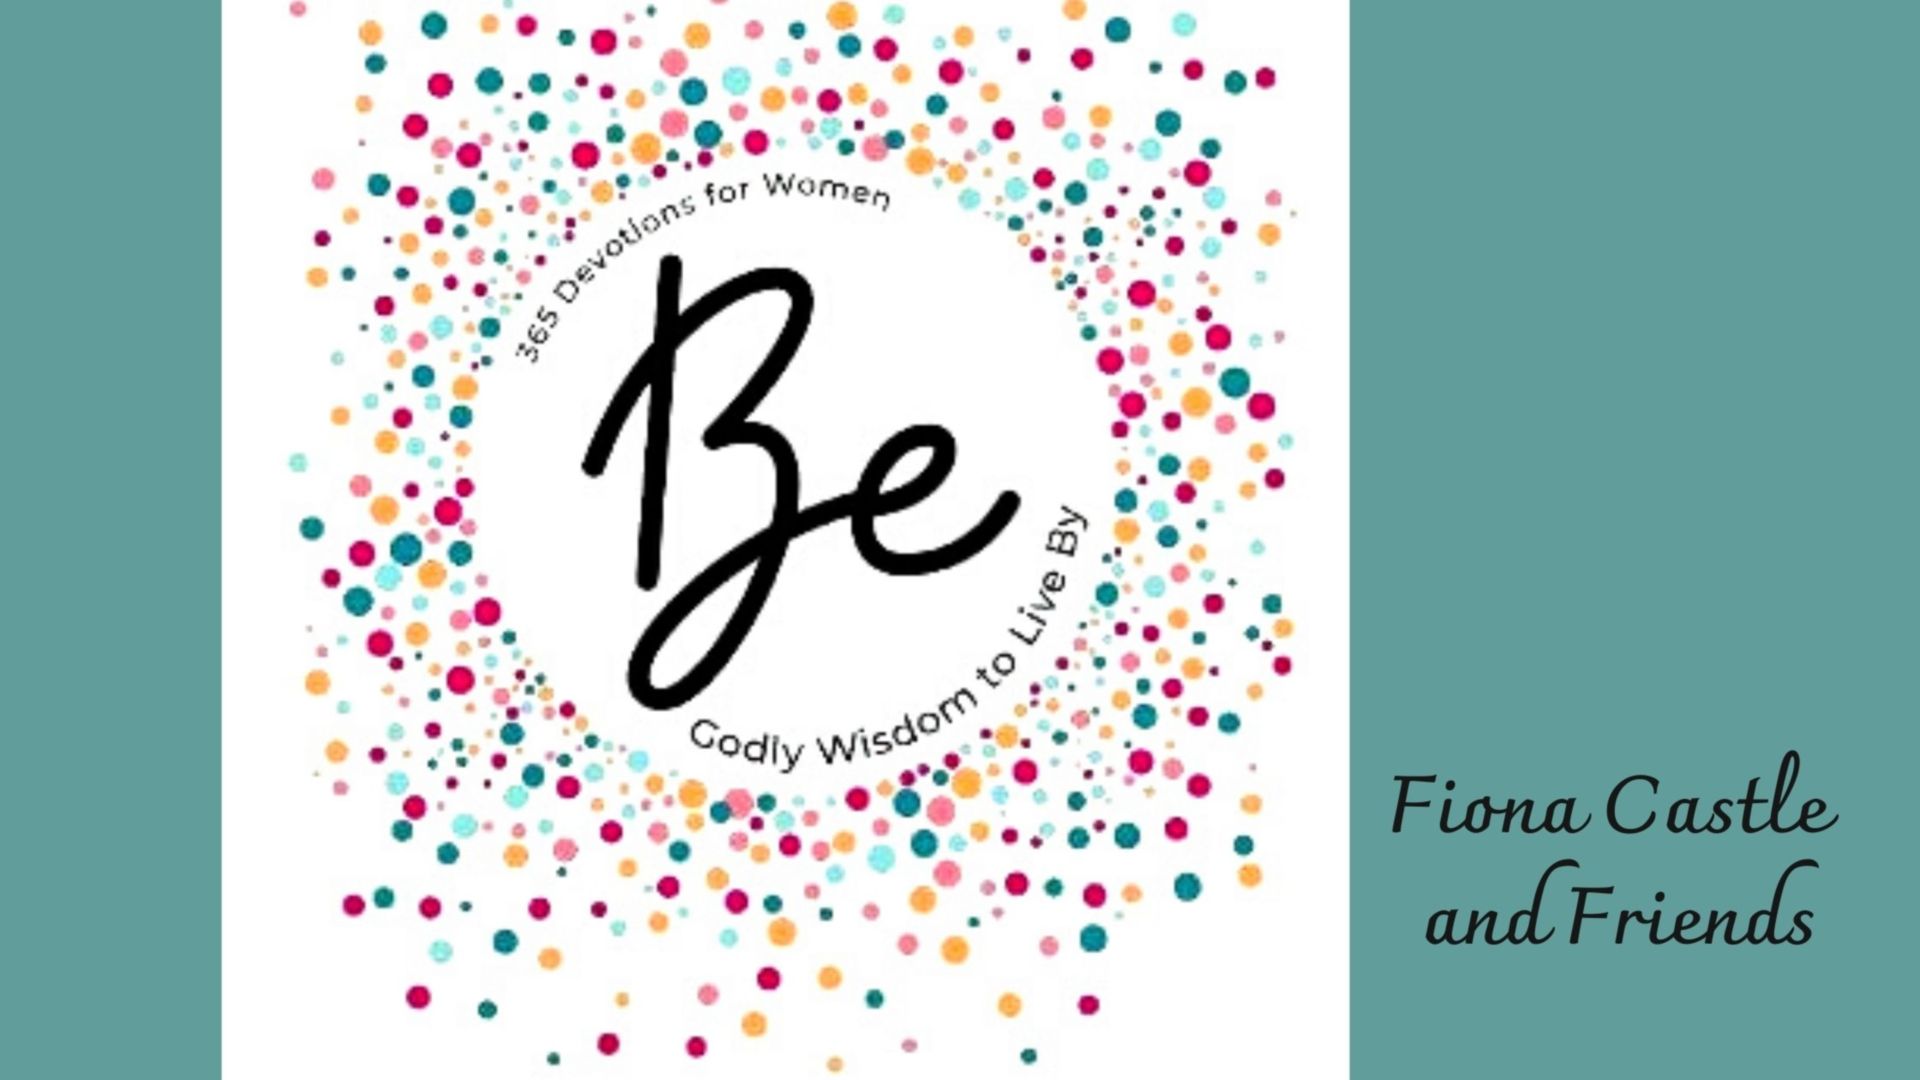 'Be', a Devotional by Fiona Castle and Friends. Godly Wisdom to Live By